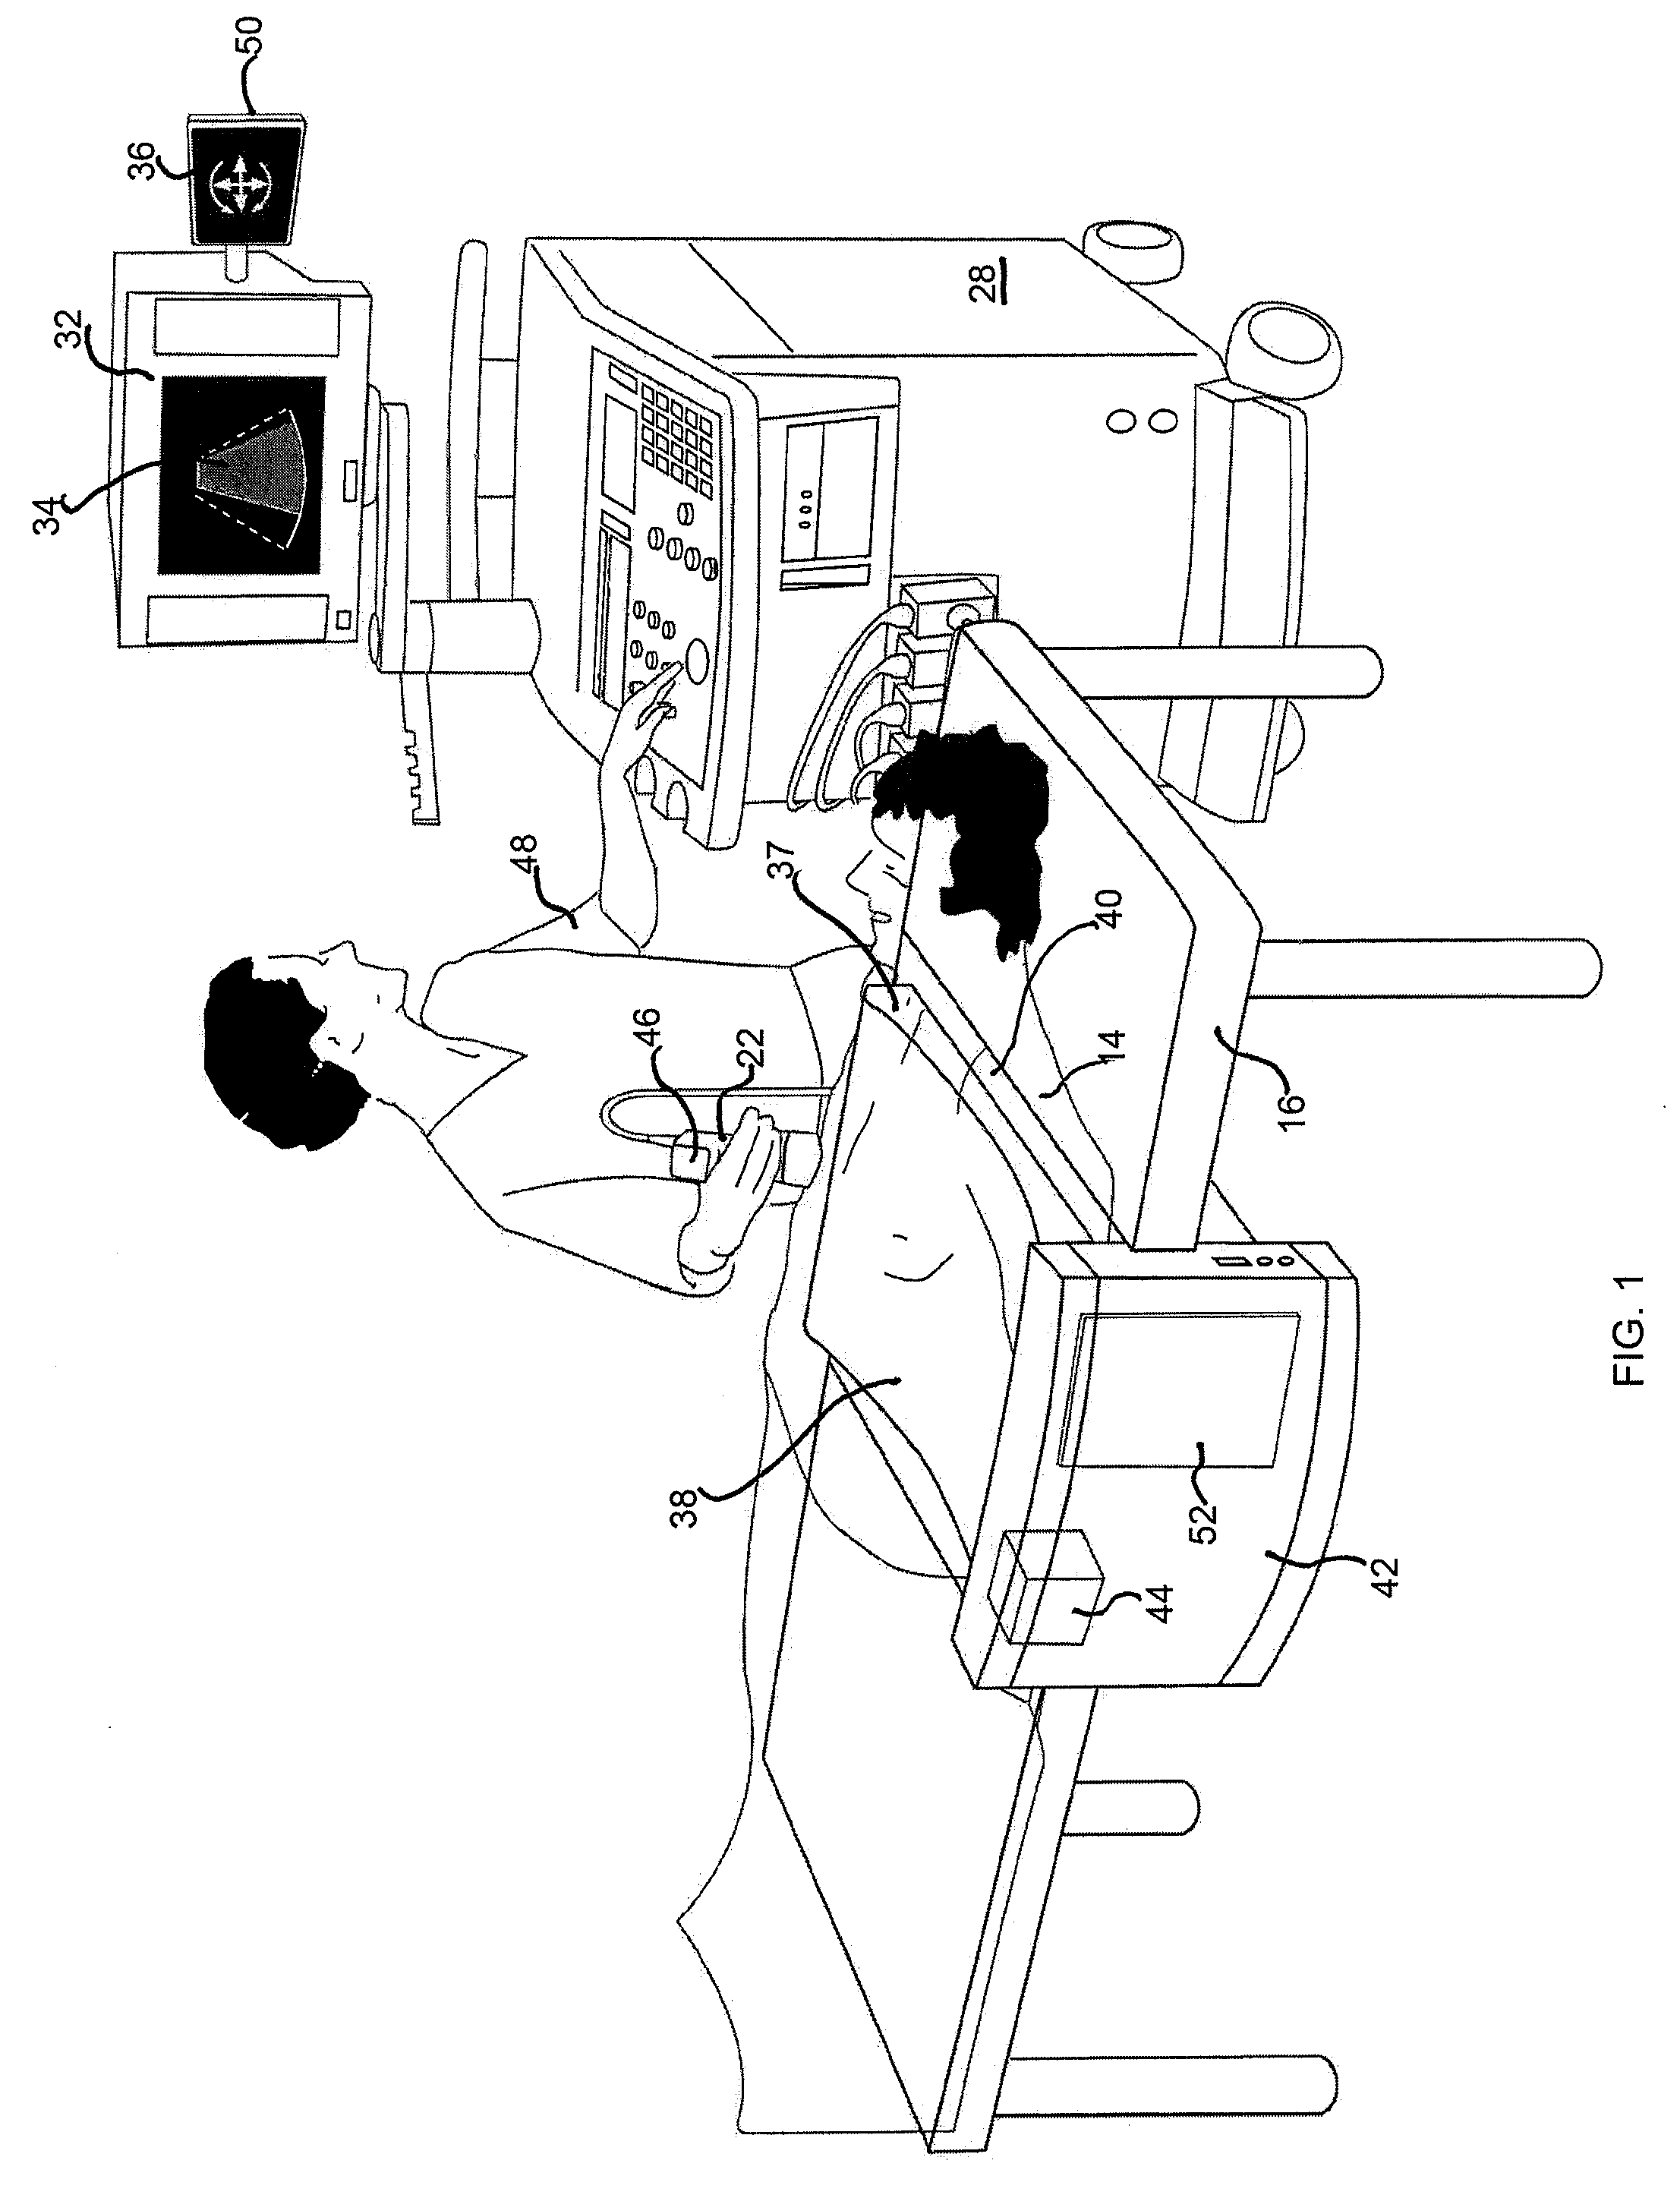 Location tracking of a metallic object in a living body using a radar detector and guiding an ultrasound probe to direct ultrasound waves at the location